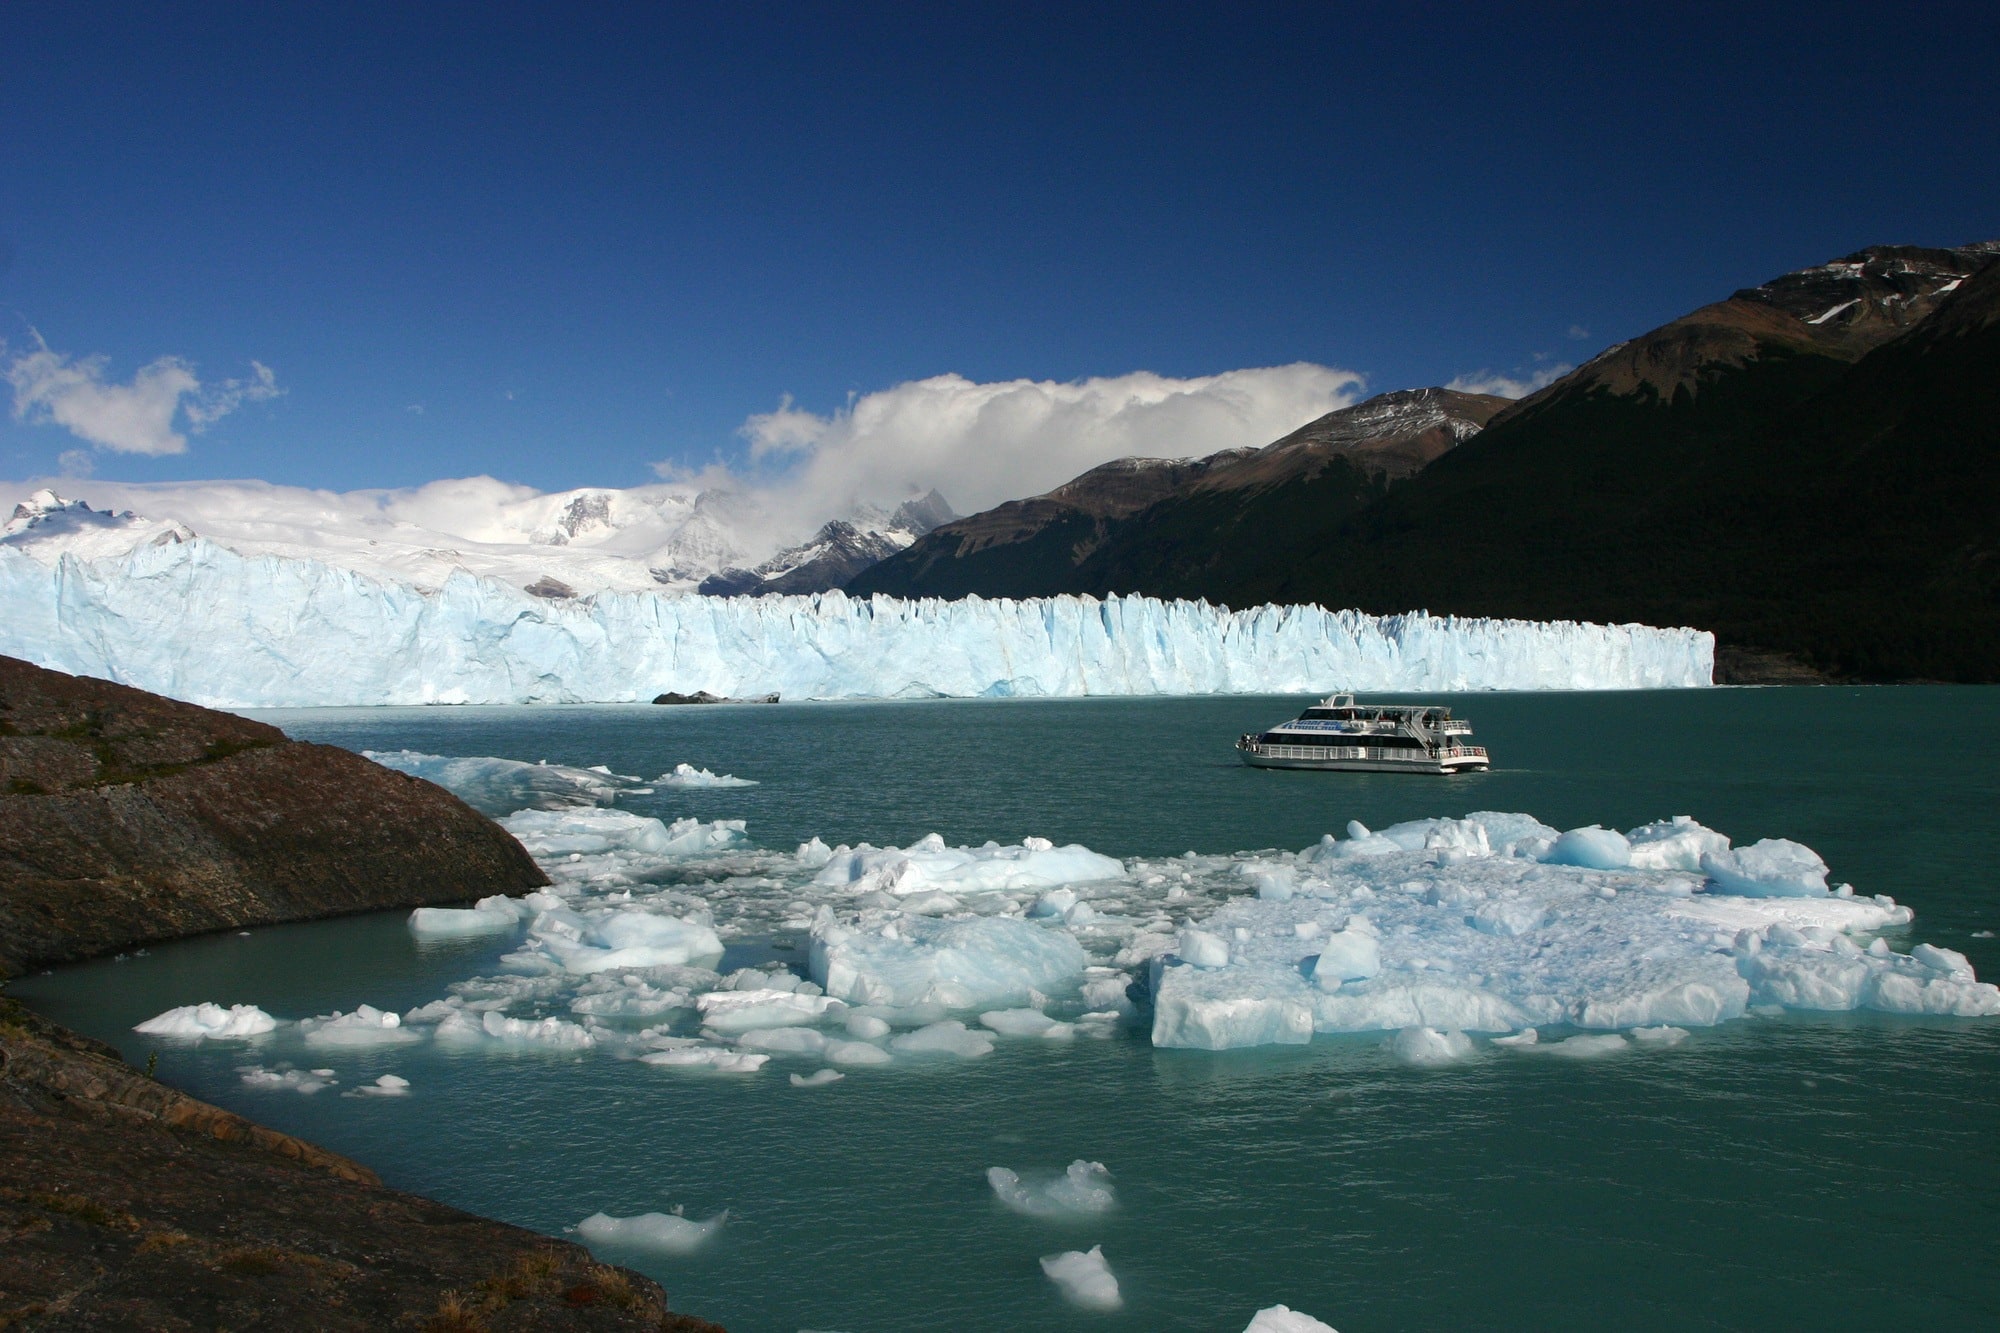 Learn everything you need to know about visiting Perito Moreno Glacier in Argentina, with info on things to do, how to get there, and park fees.